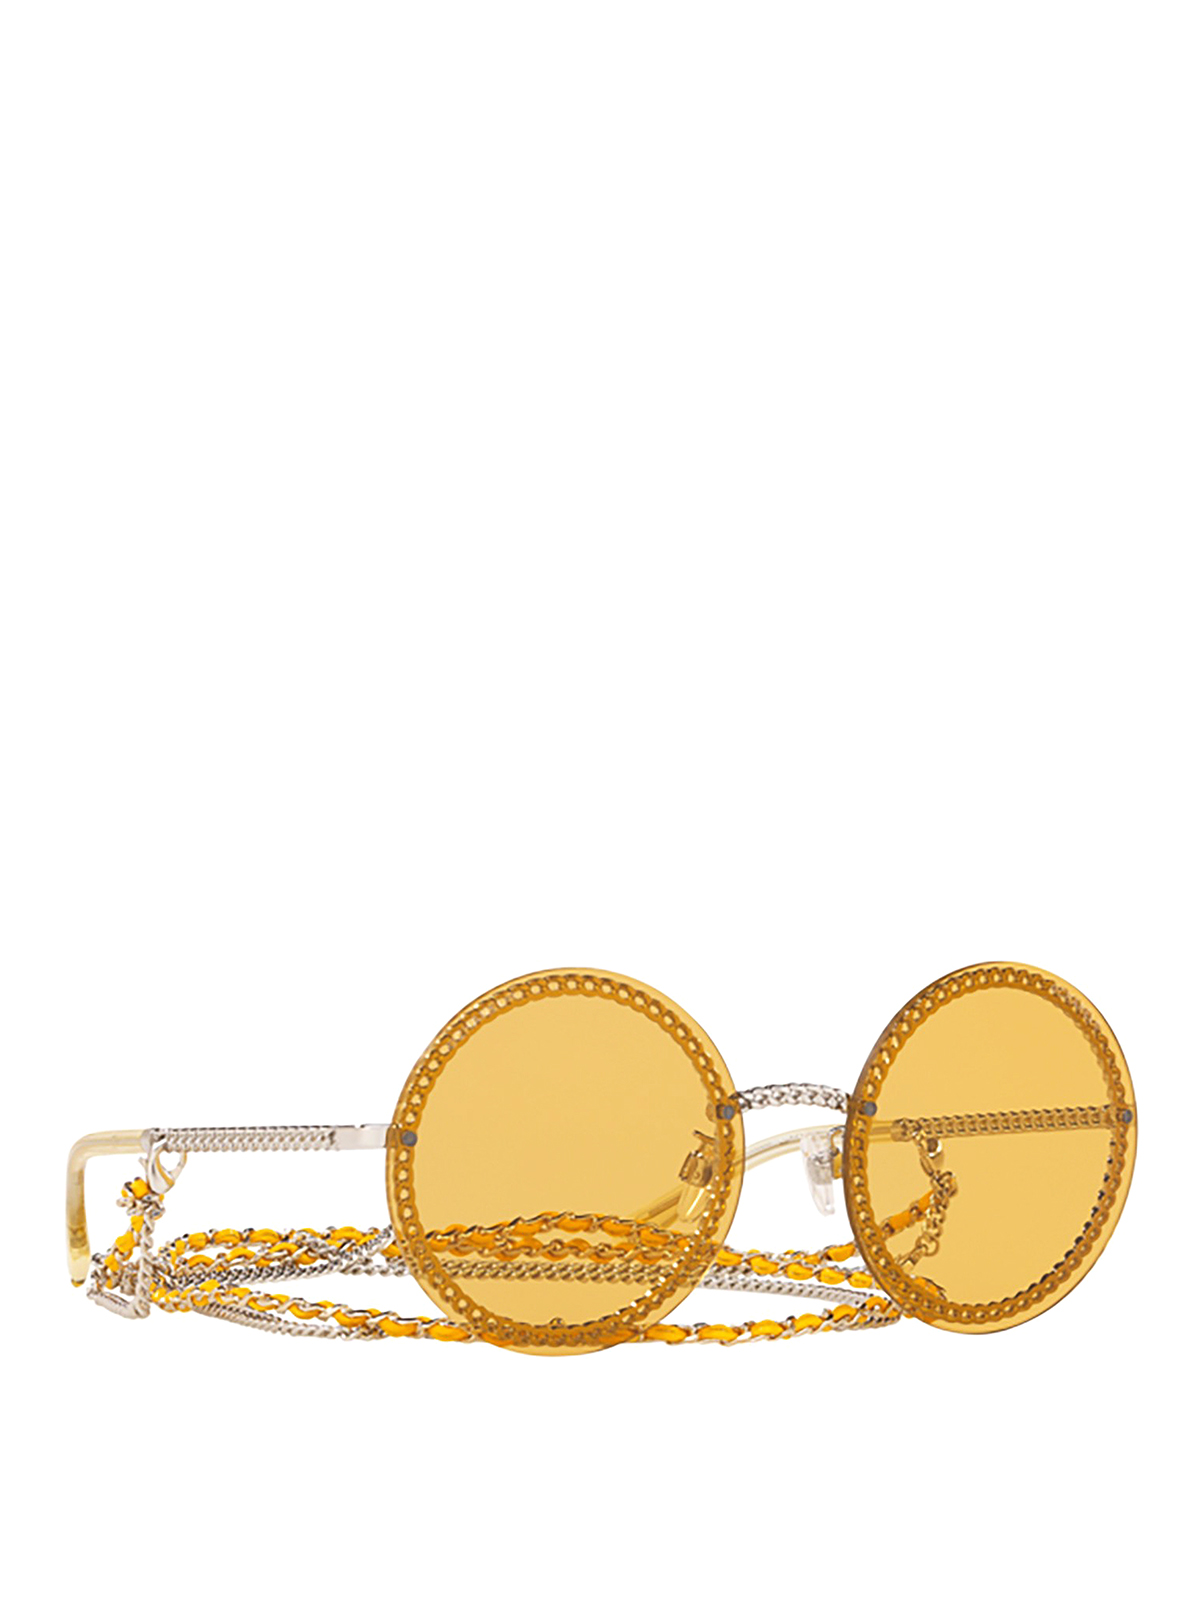 Sunglasses Chanel - Chain embellished yellow round sunglasses - CH4245C12485